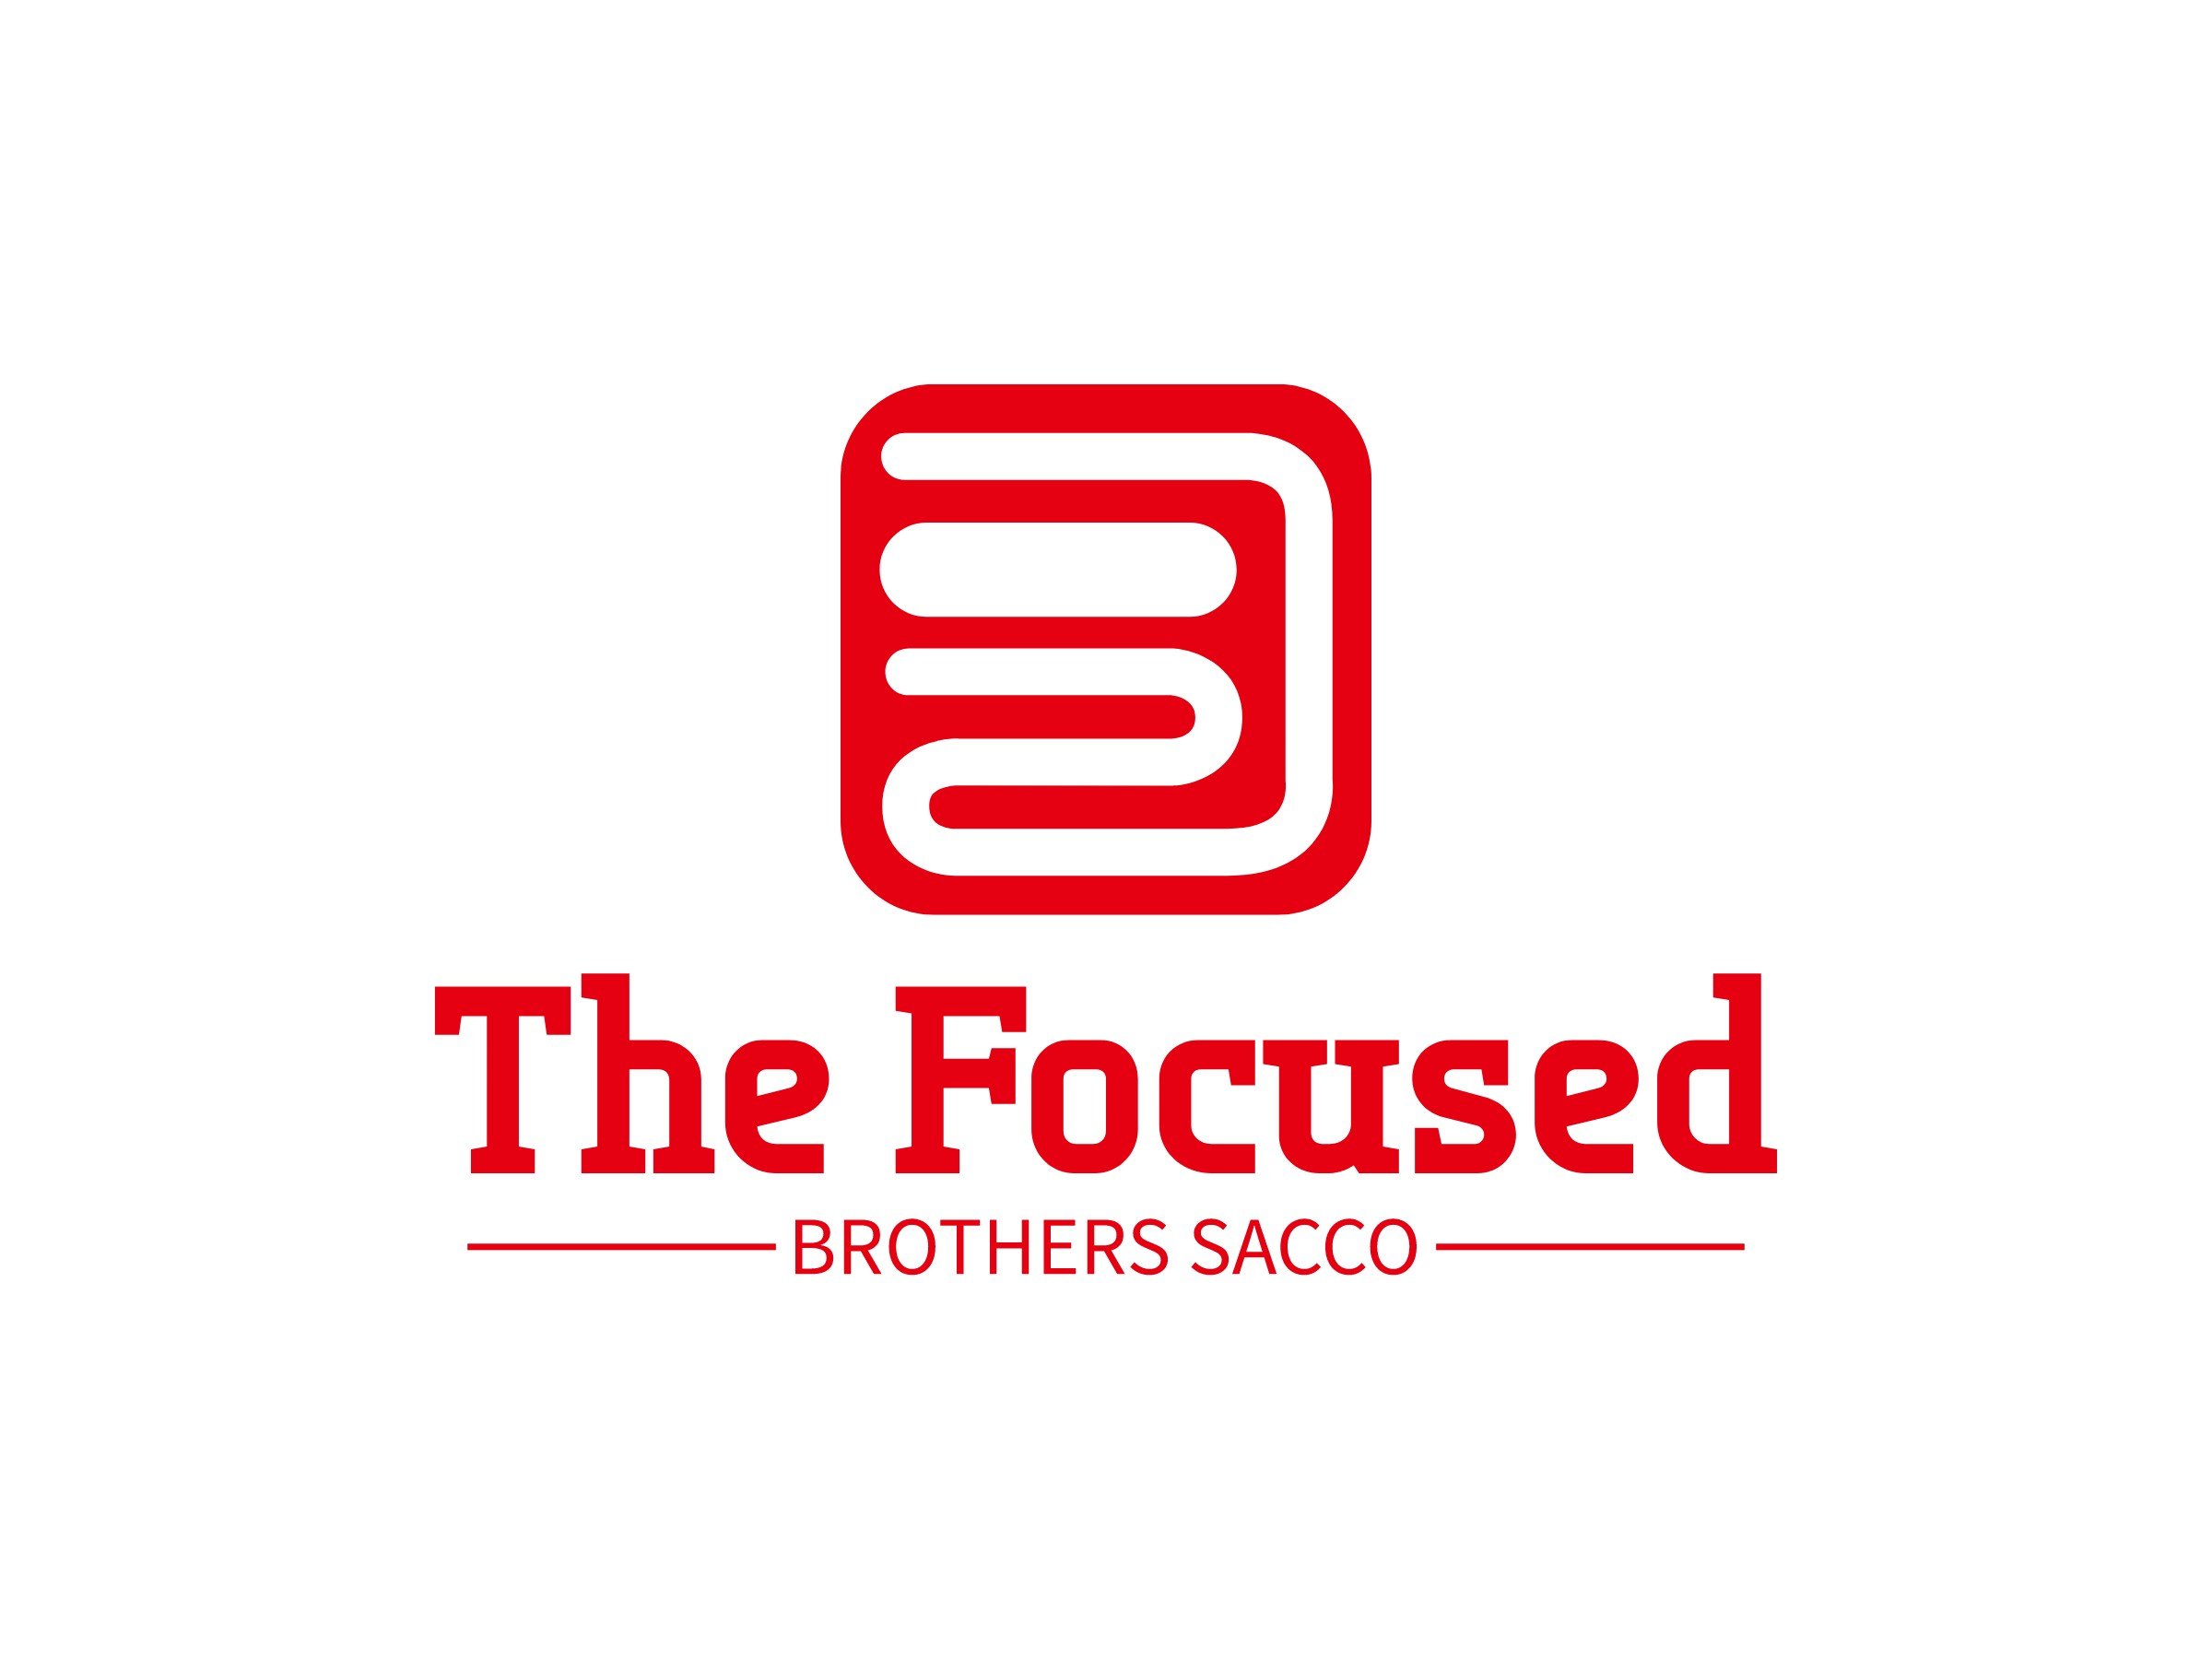 The Focused - Brothers Sacco